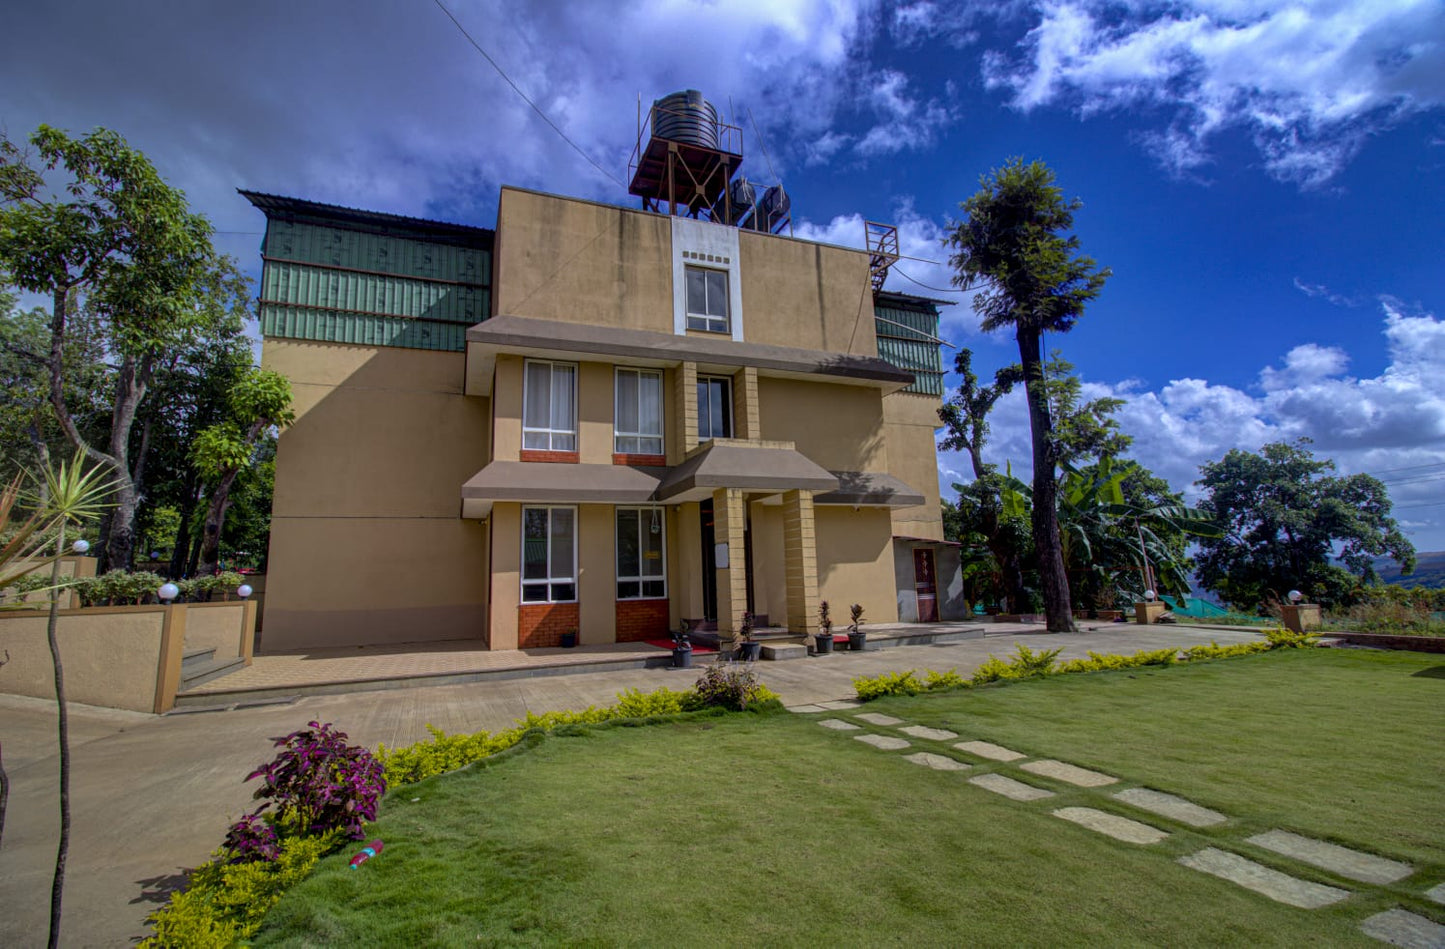 8 BHK  AC Bungalow with swimming pool (Mountain  View ) (Bungalow No -  # 8)